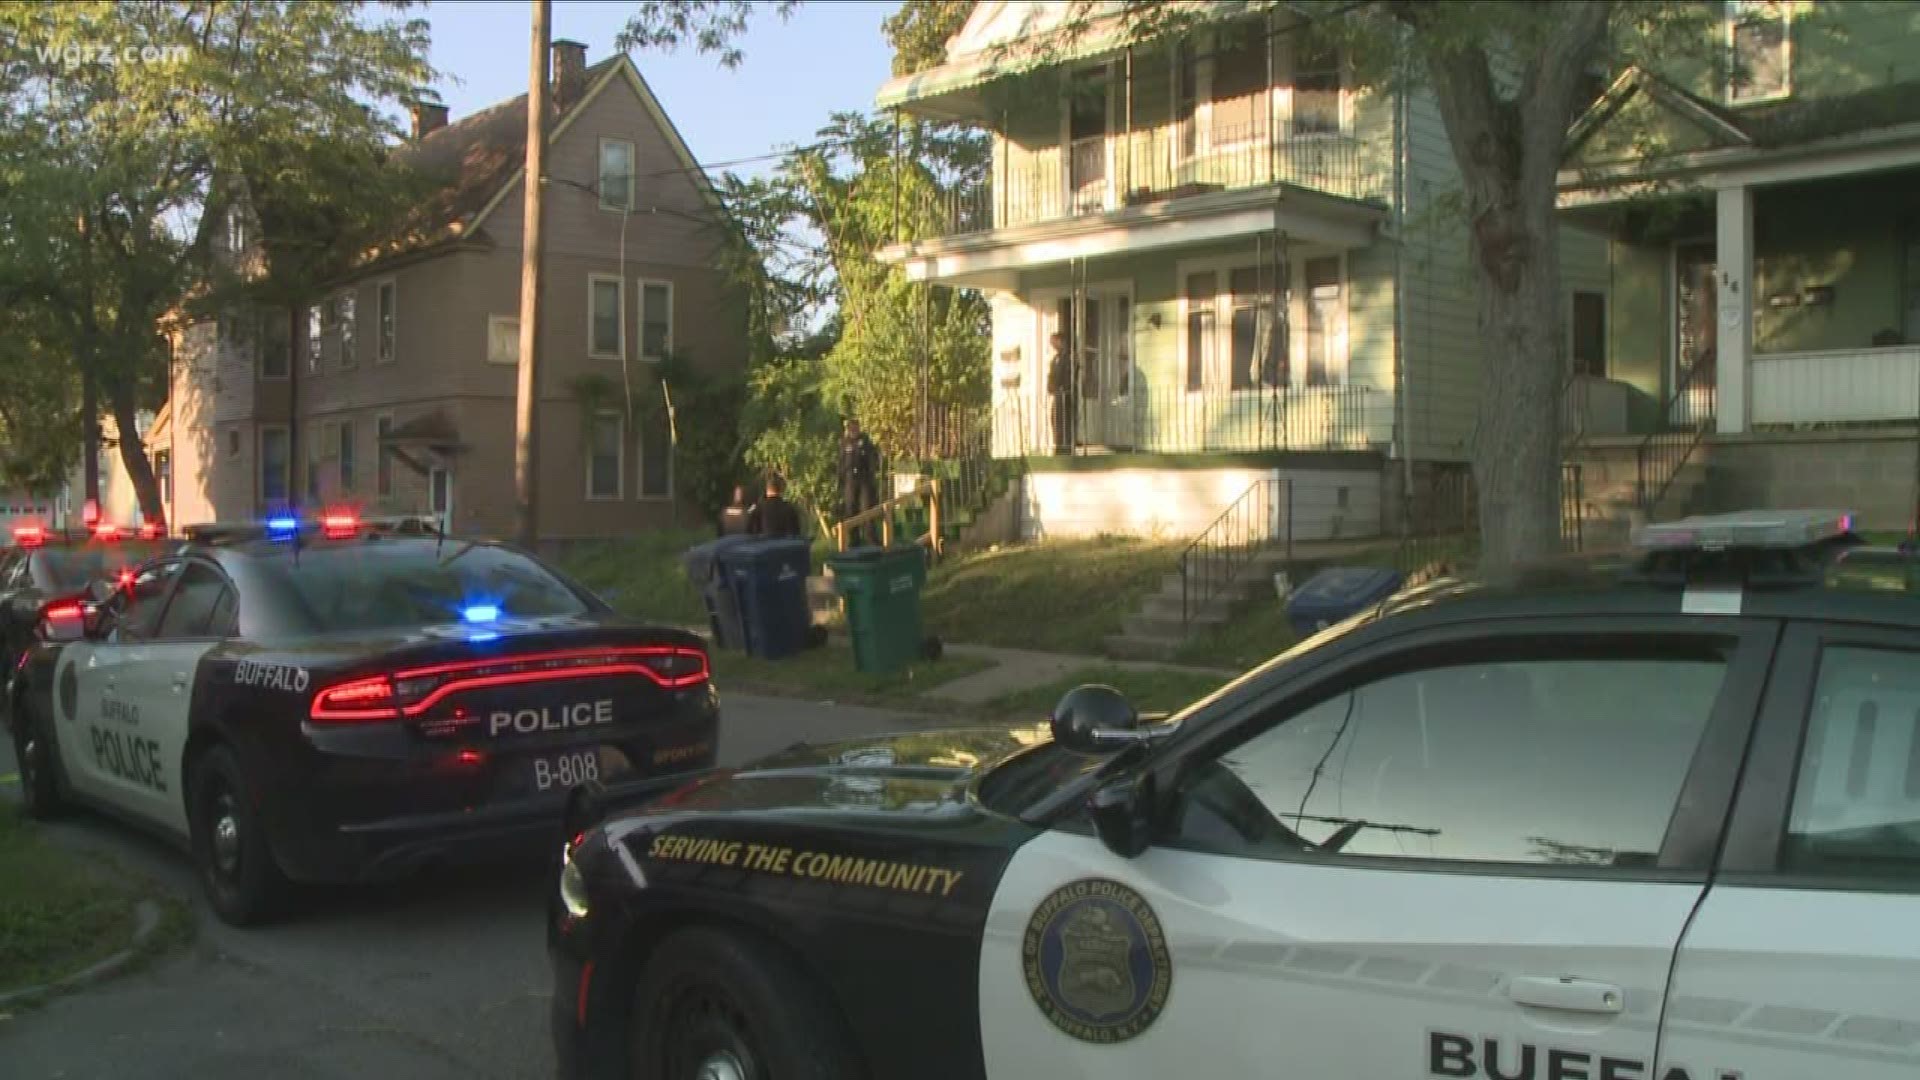 Buffalo police say the mother did cooperate when they took her into custody.